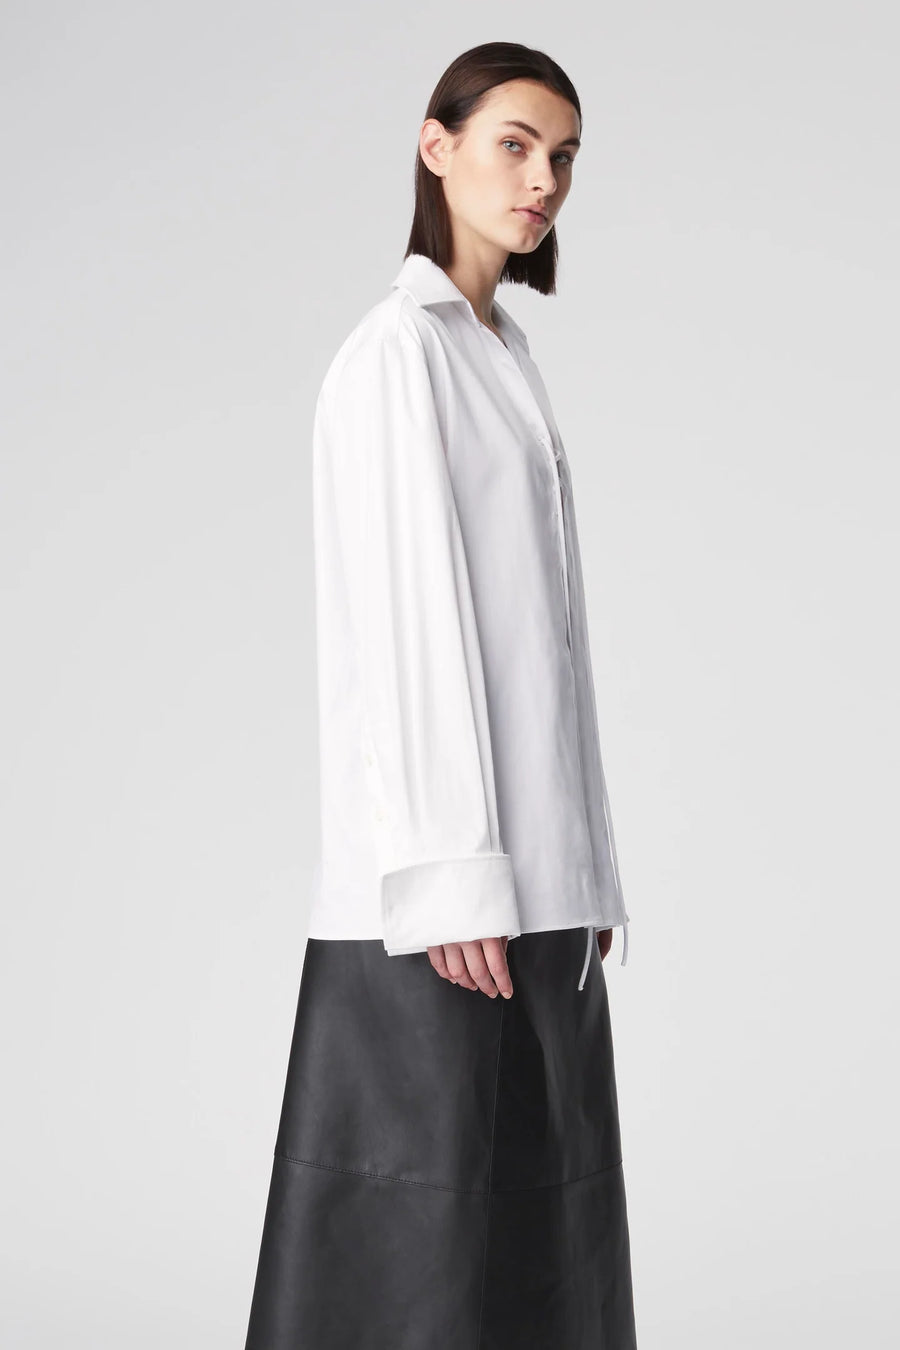 Oversized blouse featuring tie detailing at the chest and a wide collar. 